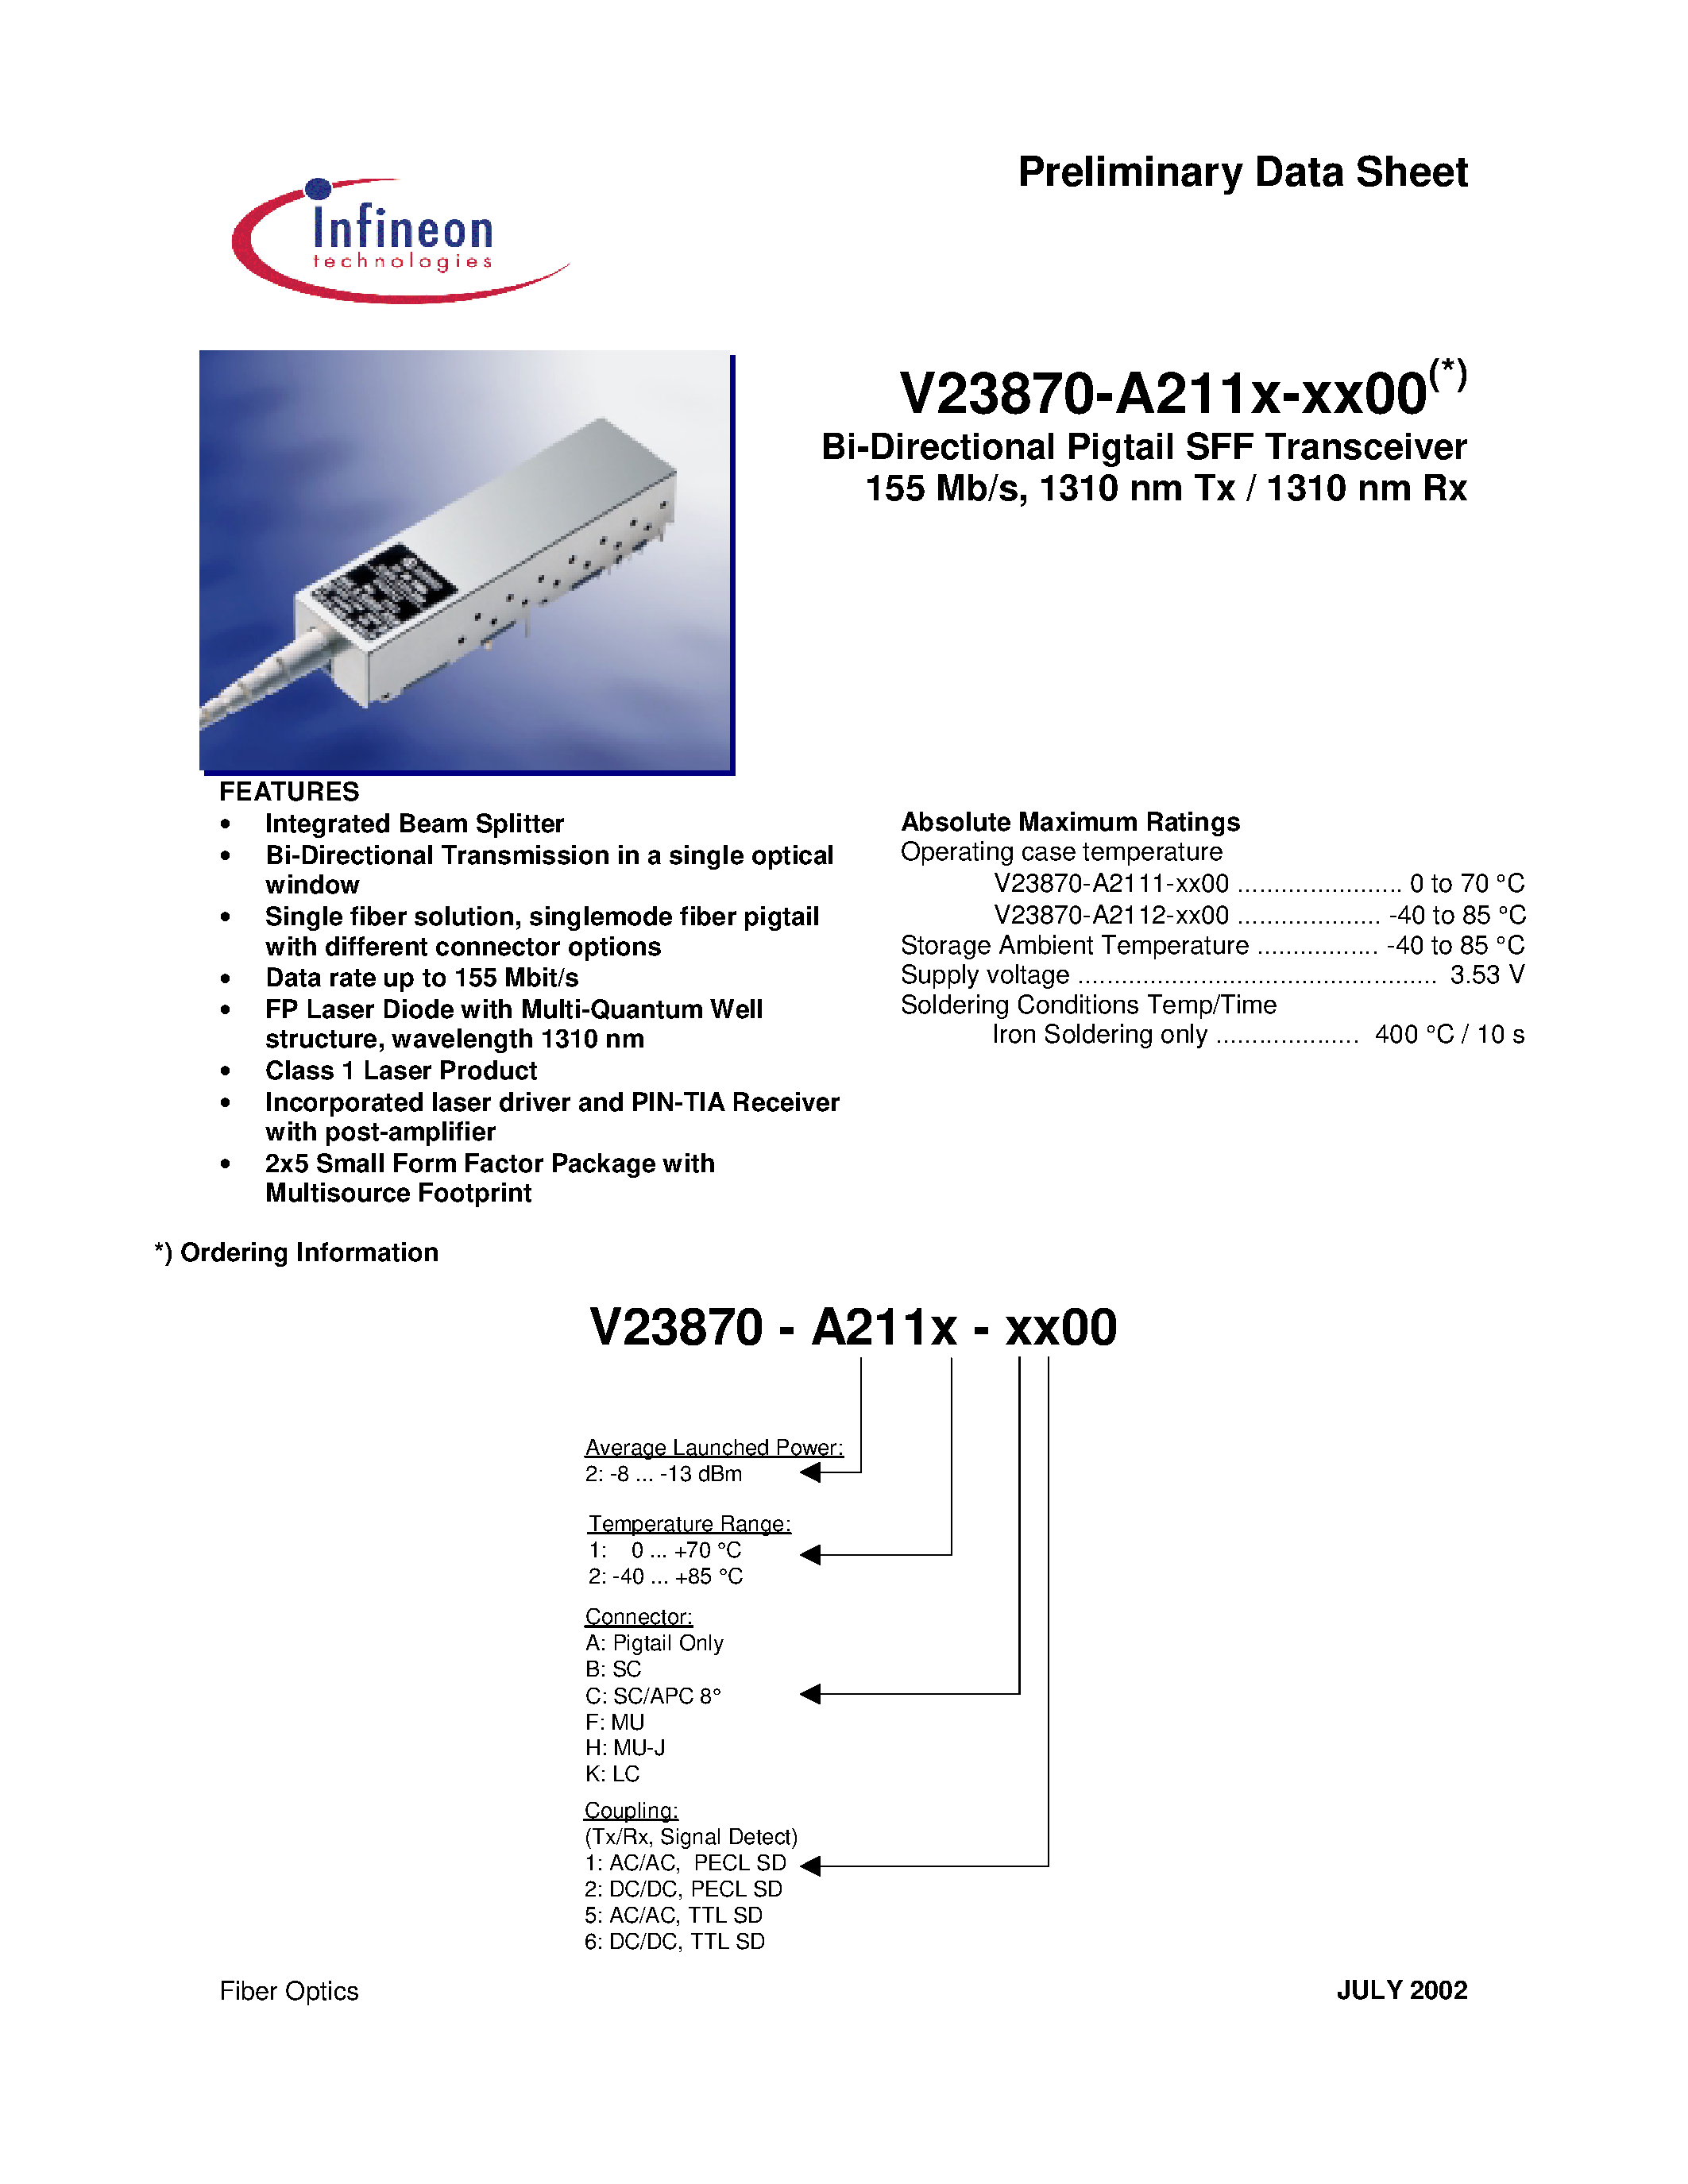 Datasheet V23870-A2111-F100 - Bi-Directional Pigtail SFF Transceiver 155 Mb/s/ 1310 nm Tx / 1310 nm Rx page 1